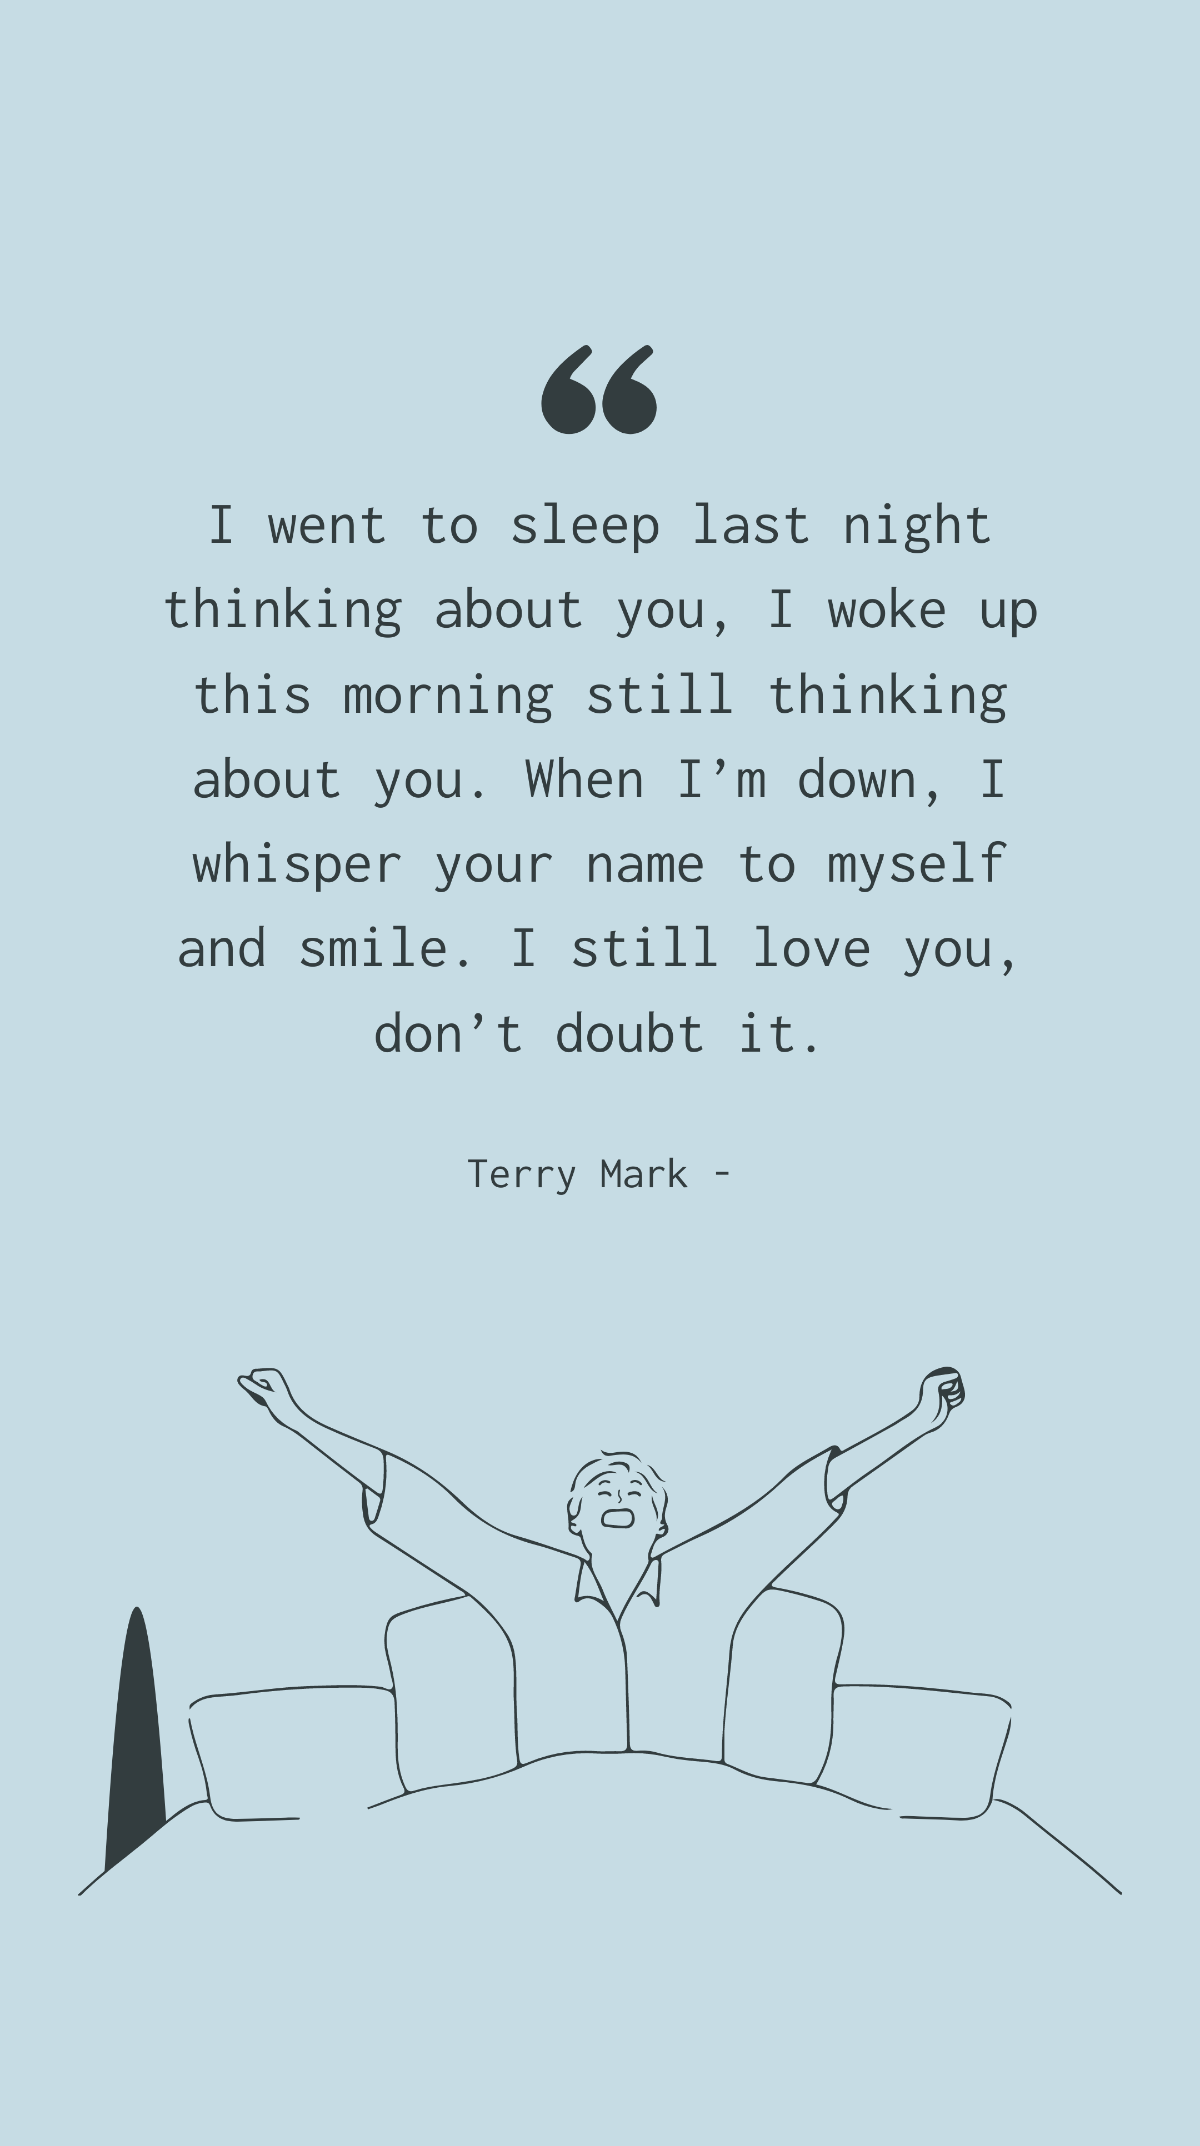 Terry Mark - I went to sleep last night thinking about you, I woke up this morning still thinking about you. When I’m down, I whisper your name to myself and smile. I still love you, don’t doubt it. T